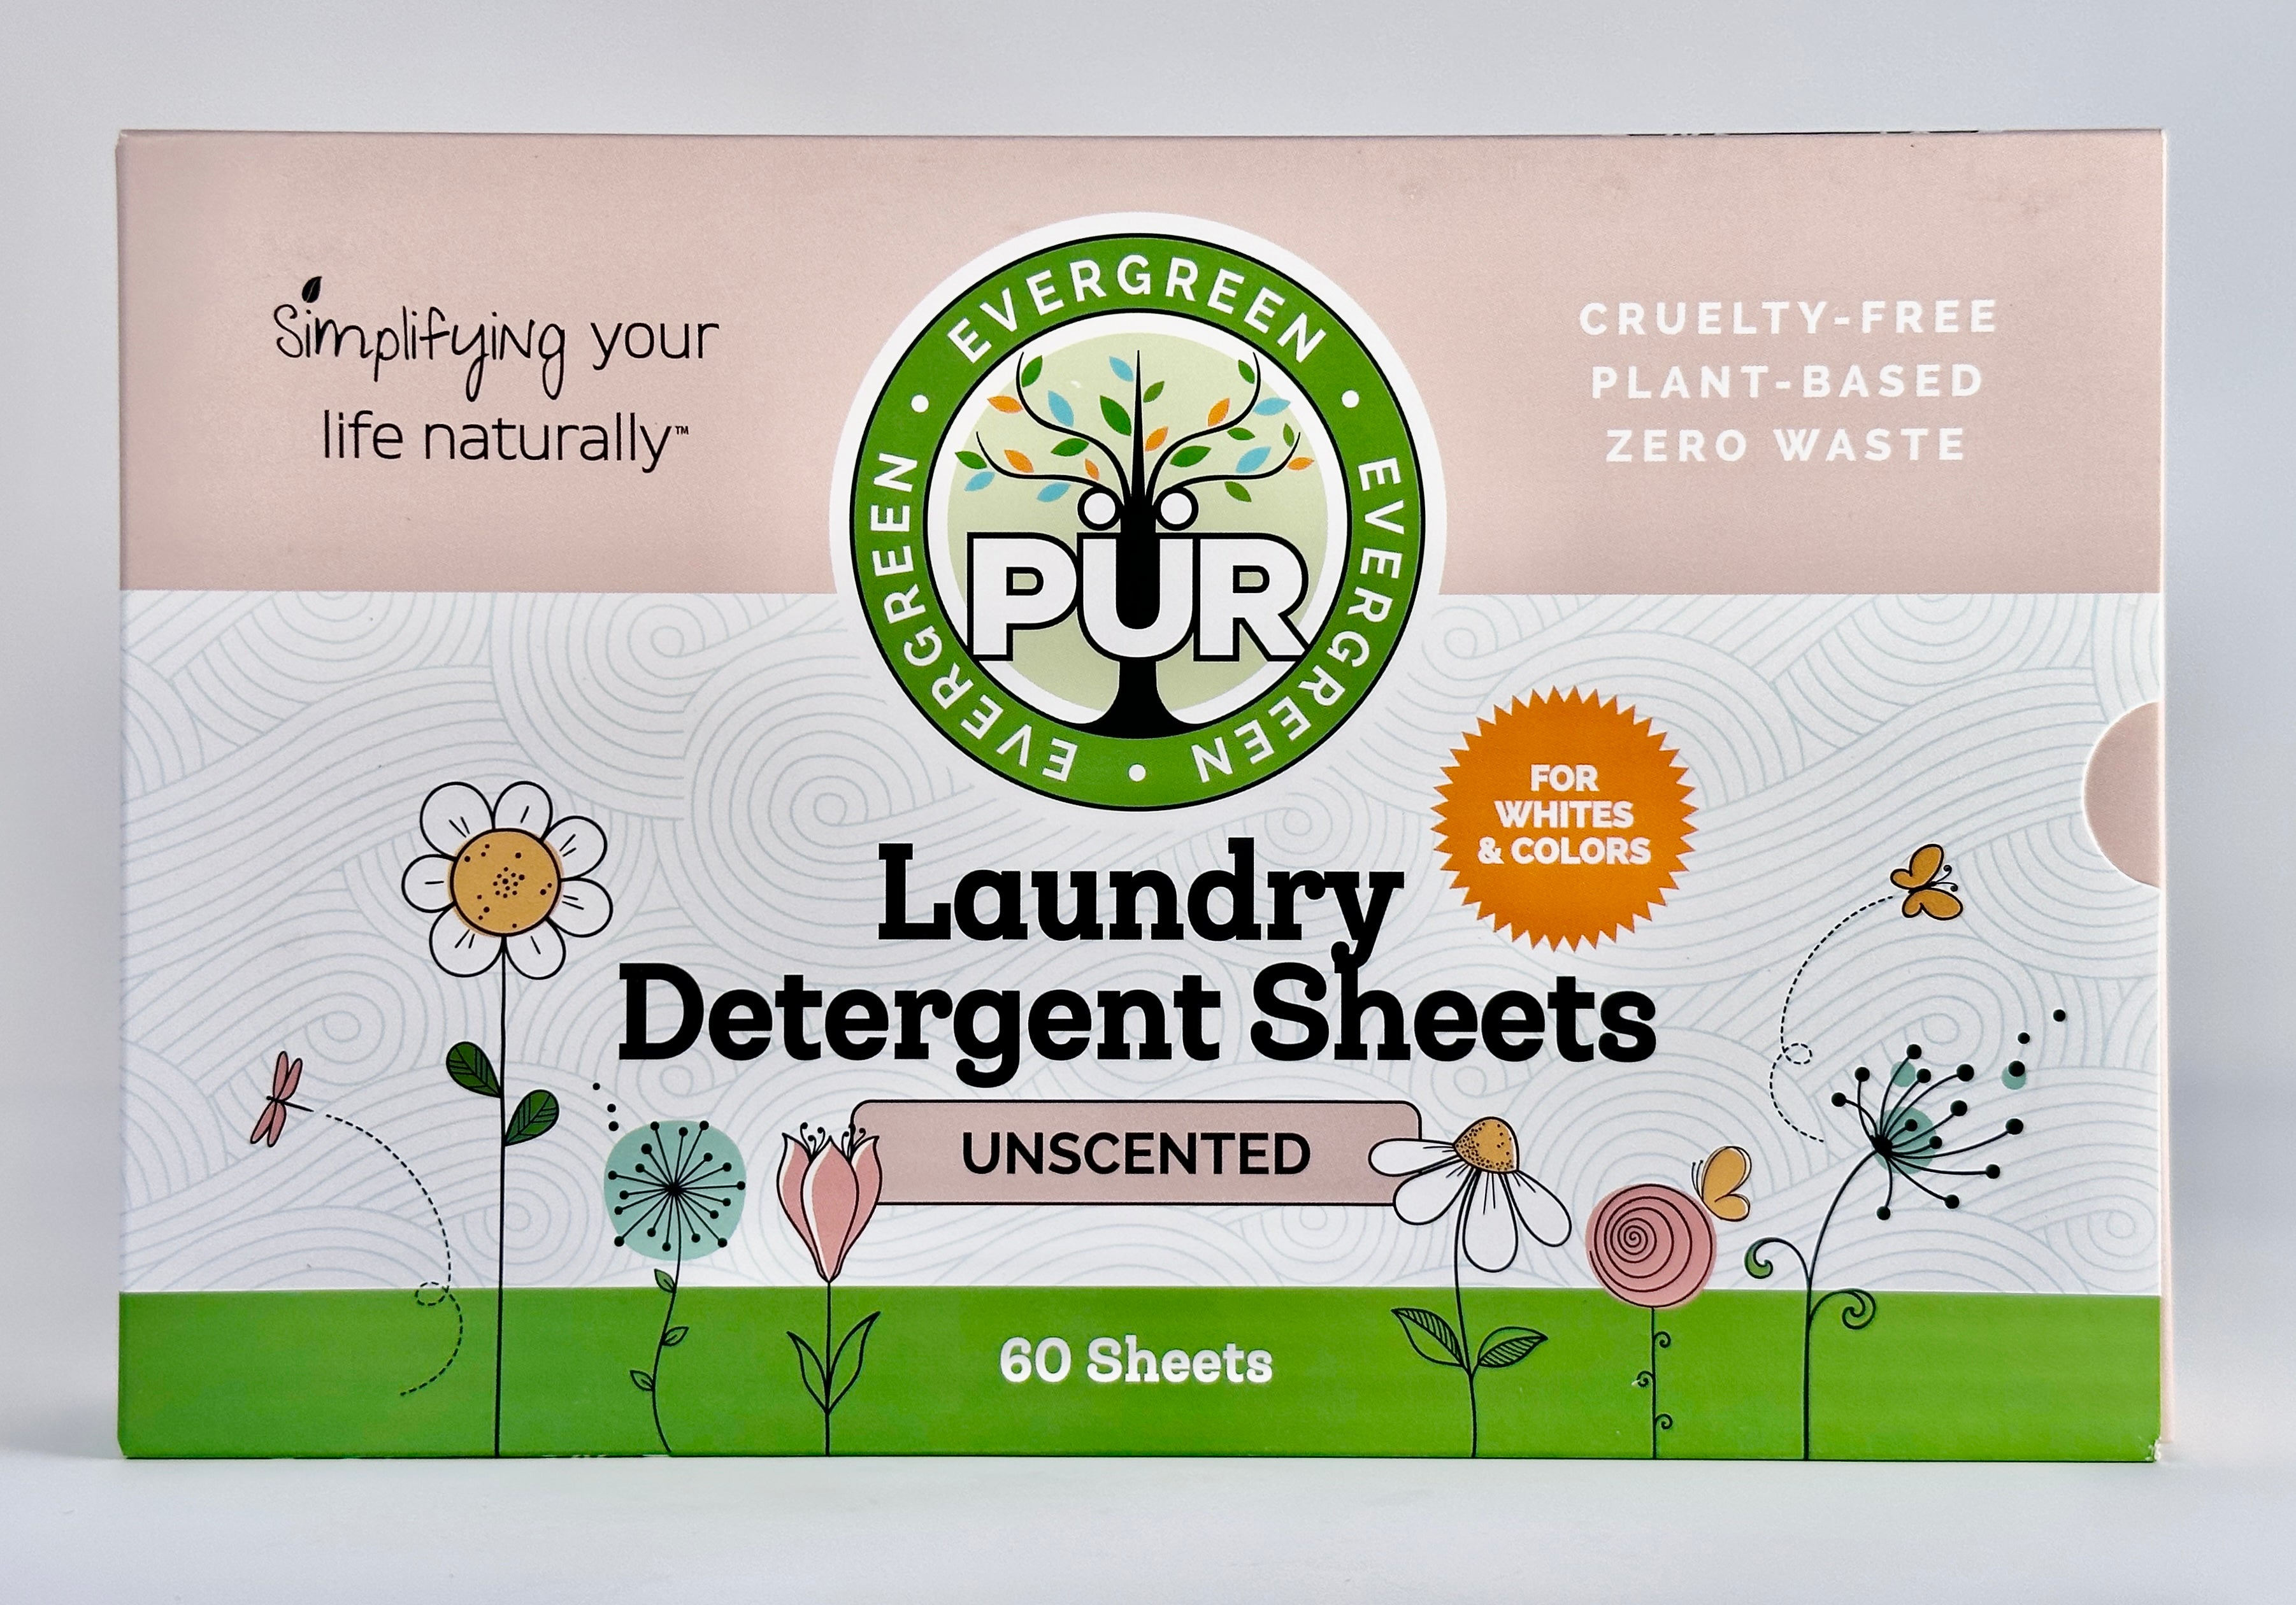 Tru Earth Compact Dry Laundry Detergent Sheets, Unscented - Up to